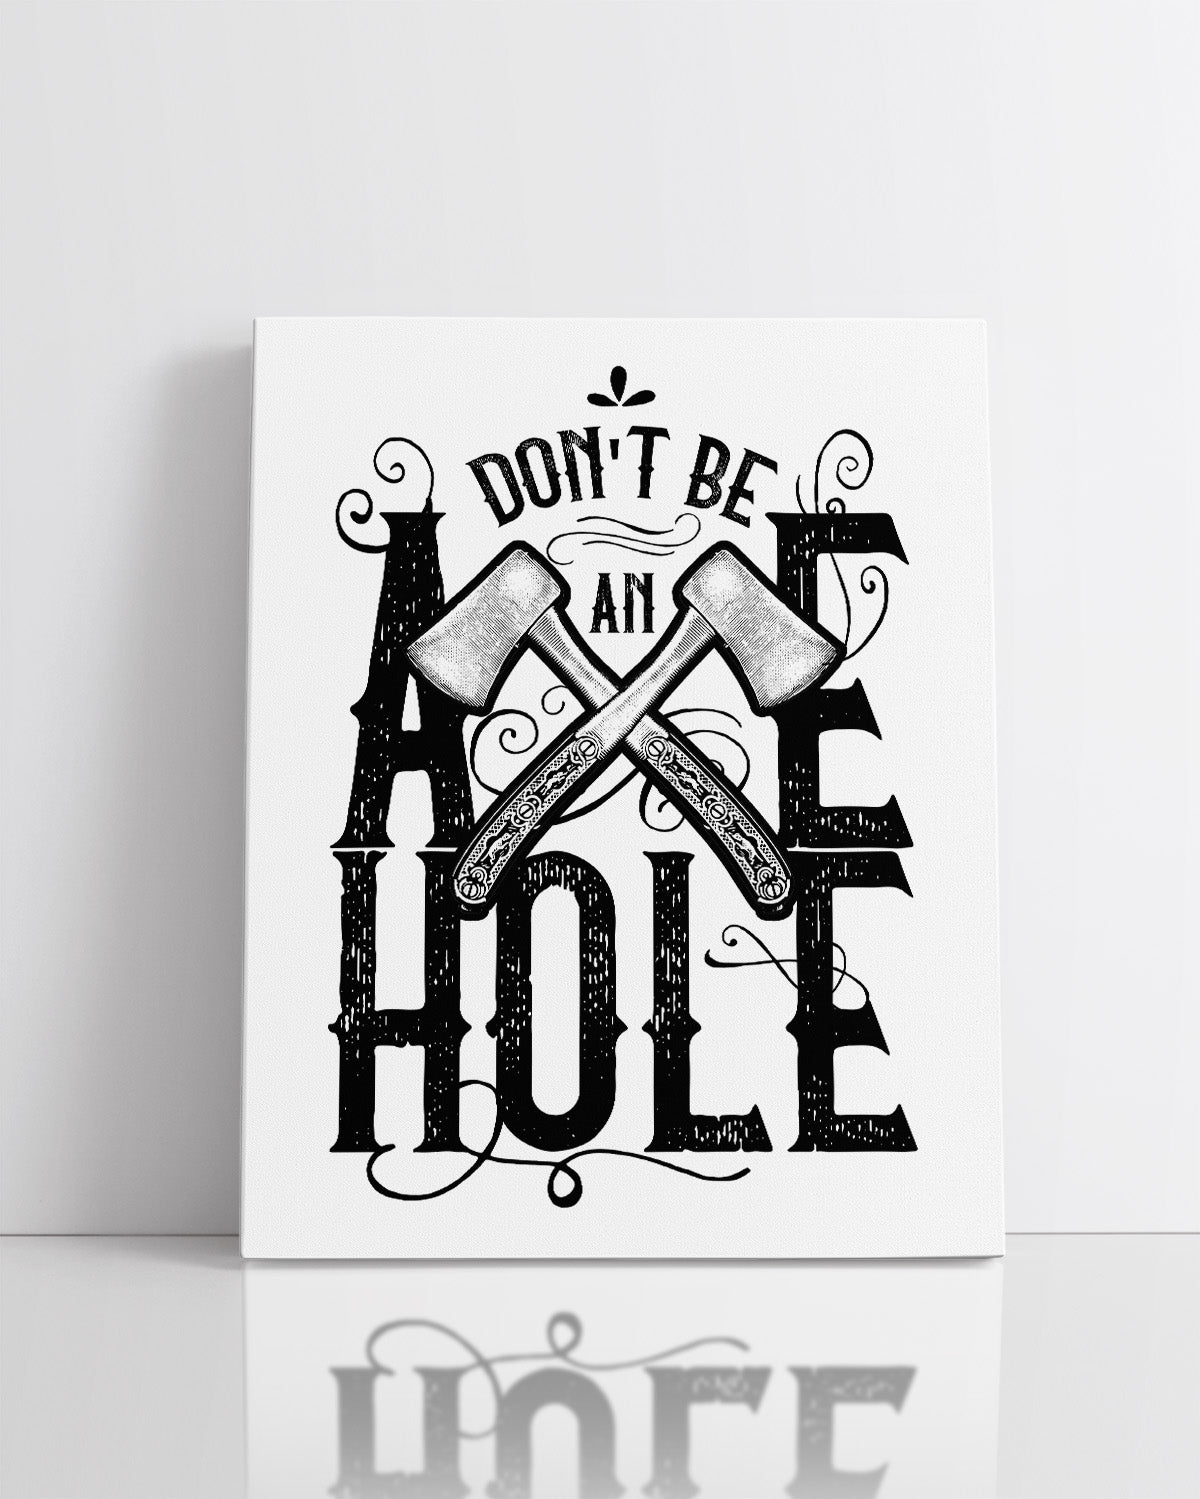 Don't Be An Axe Hole - Lumberjack Decorations for Home - Rustic Man Cave Decor - Funny Gifts for Lumberjacks